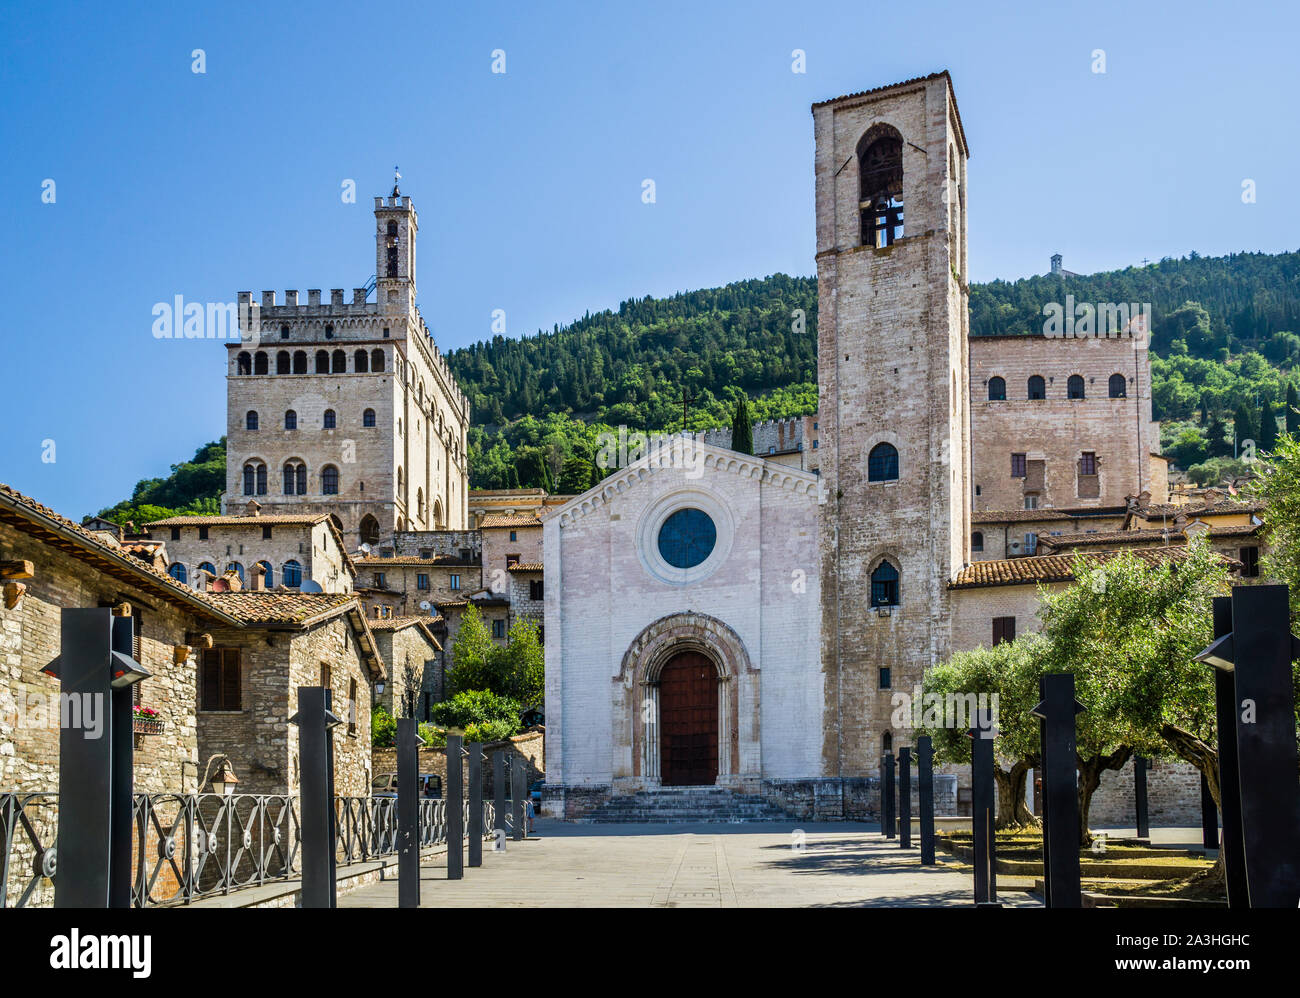 Piazza and Church of San Giovanni against the backdrop of the medieval Palazzo dei Consoli, Gubbio, Umbria, Italy Stock Photo